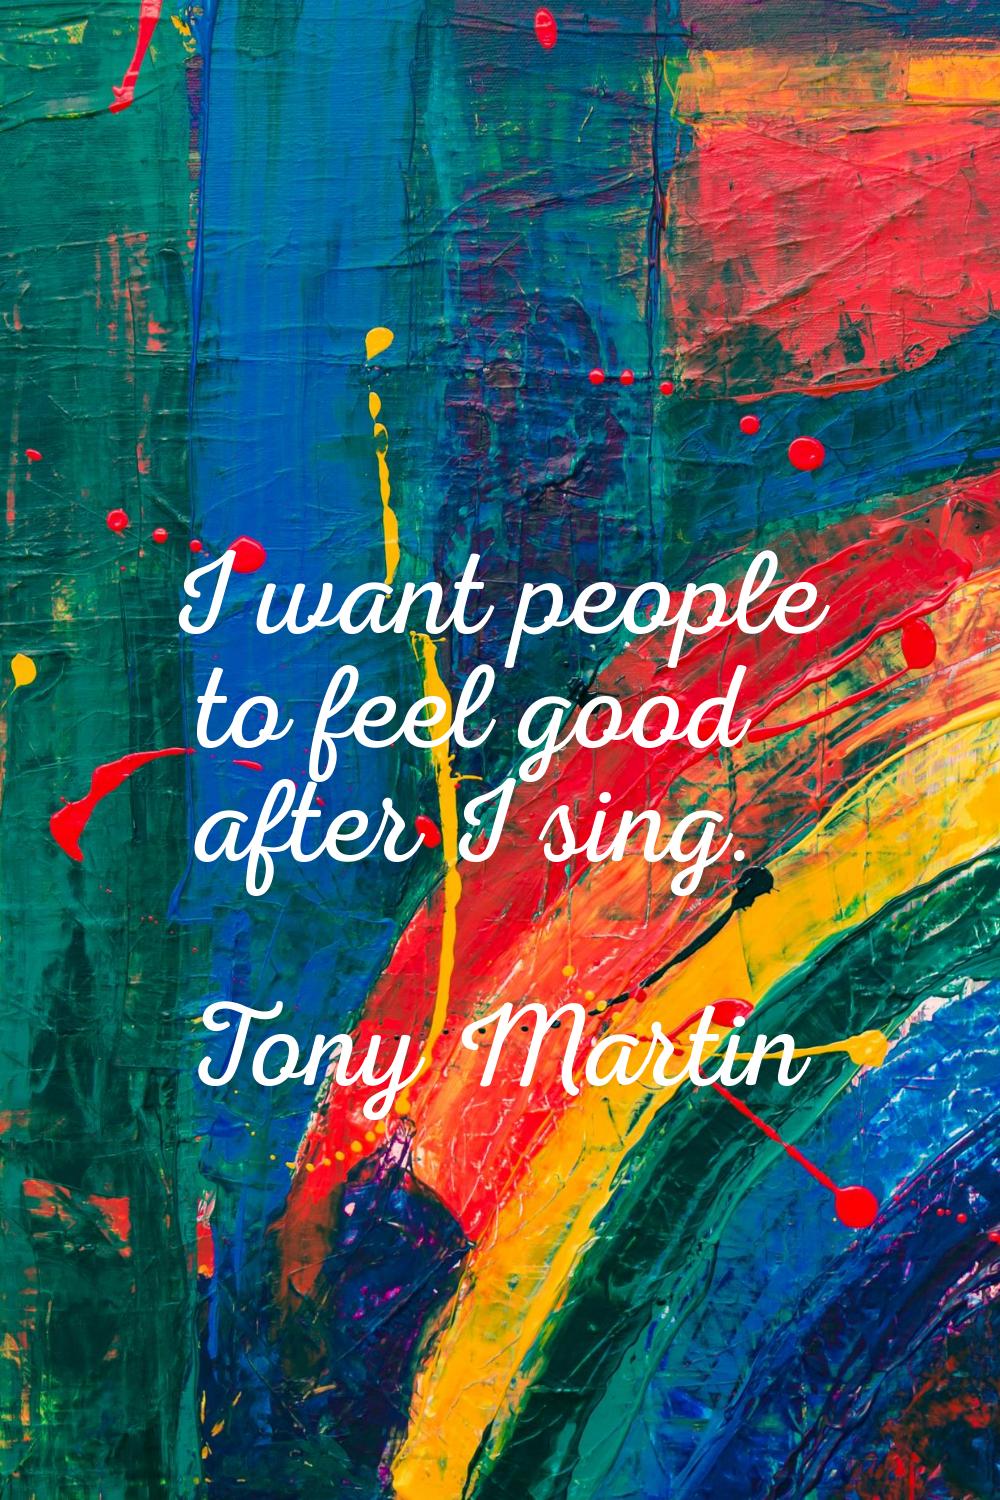 I want people to feel good after I sing.